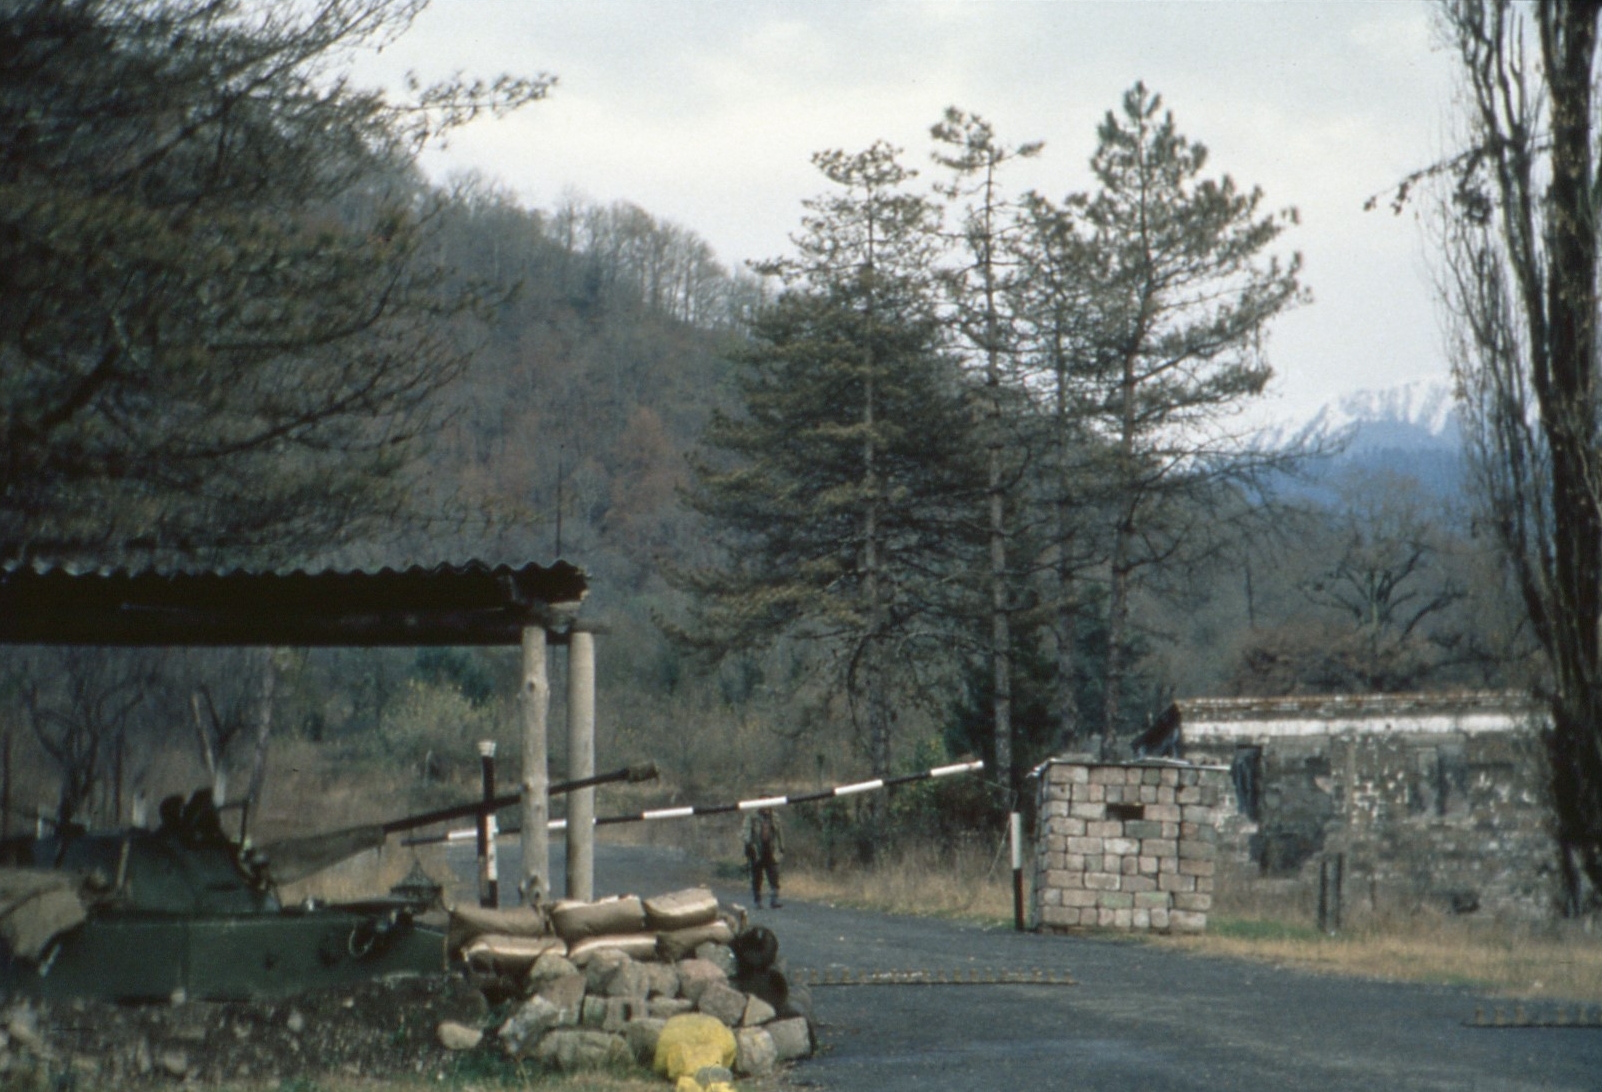 The road to Svanetia from the Russian Checkpoint at Lata. Author’s own photo